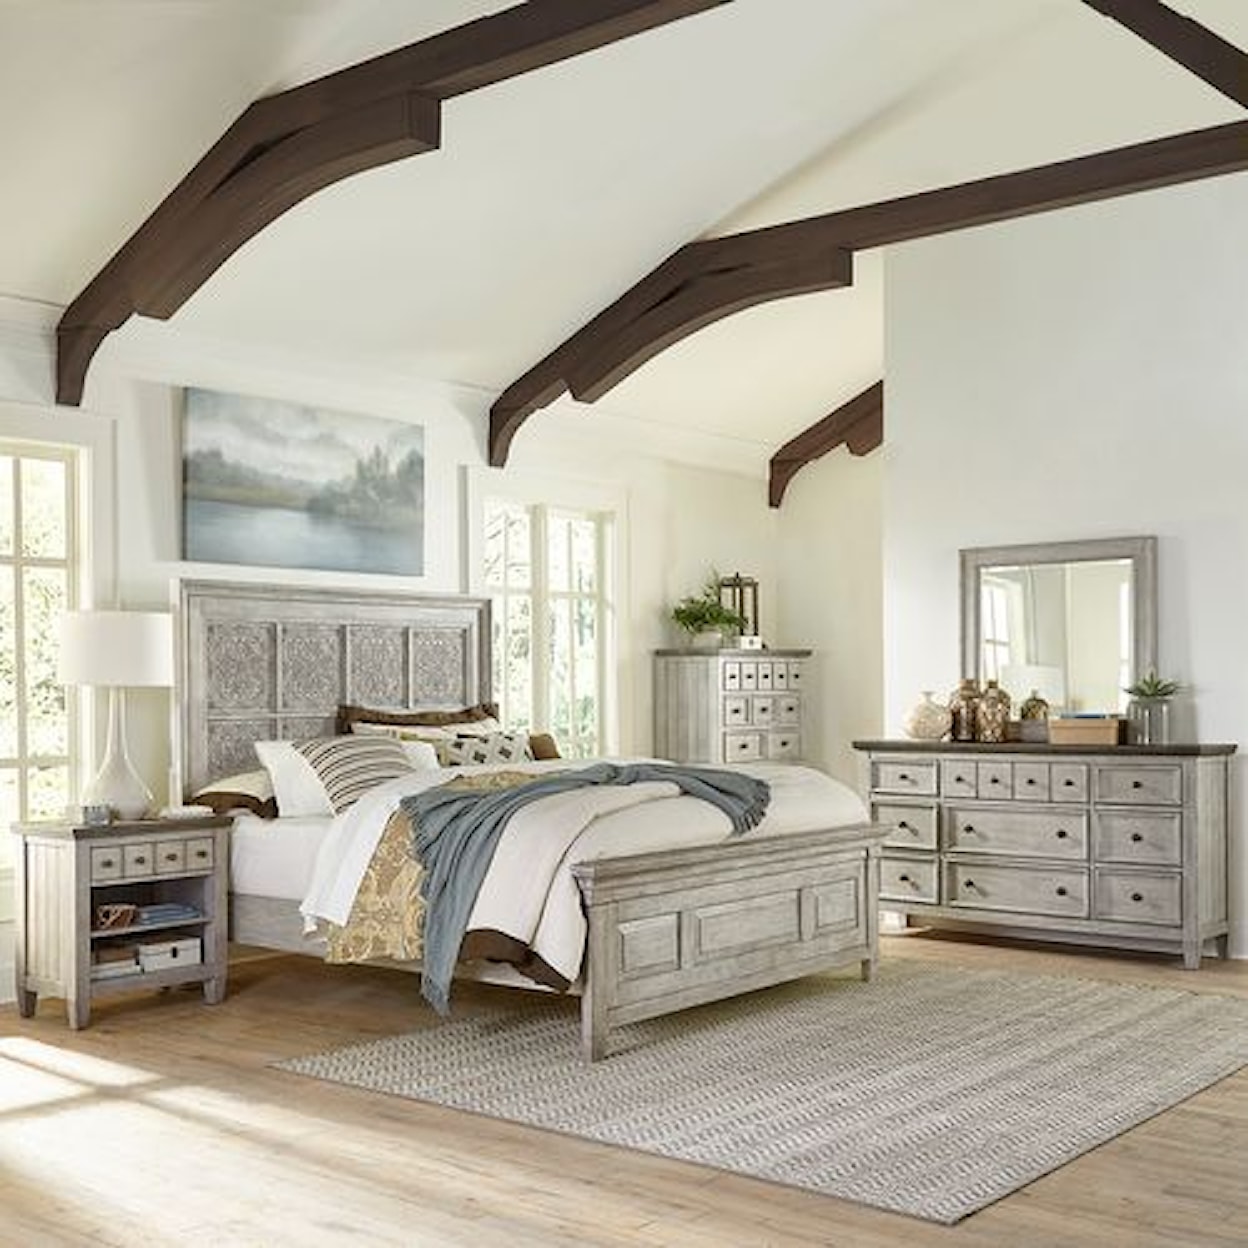 Libby Haven 5-Piece Decorative King Panel Bedroom Group